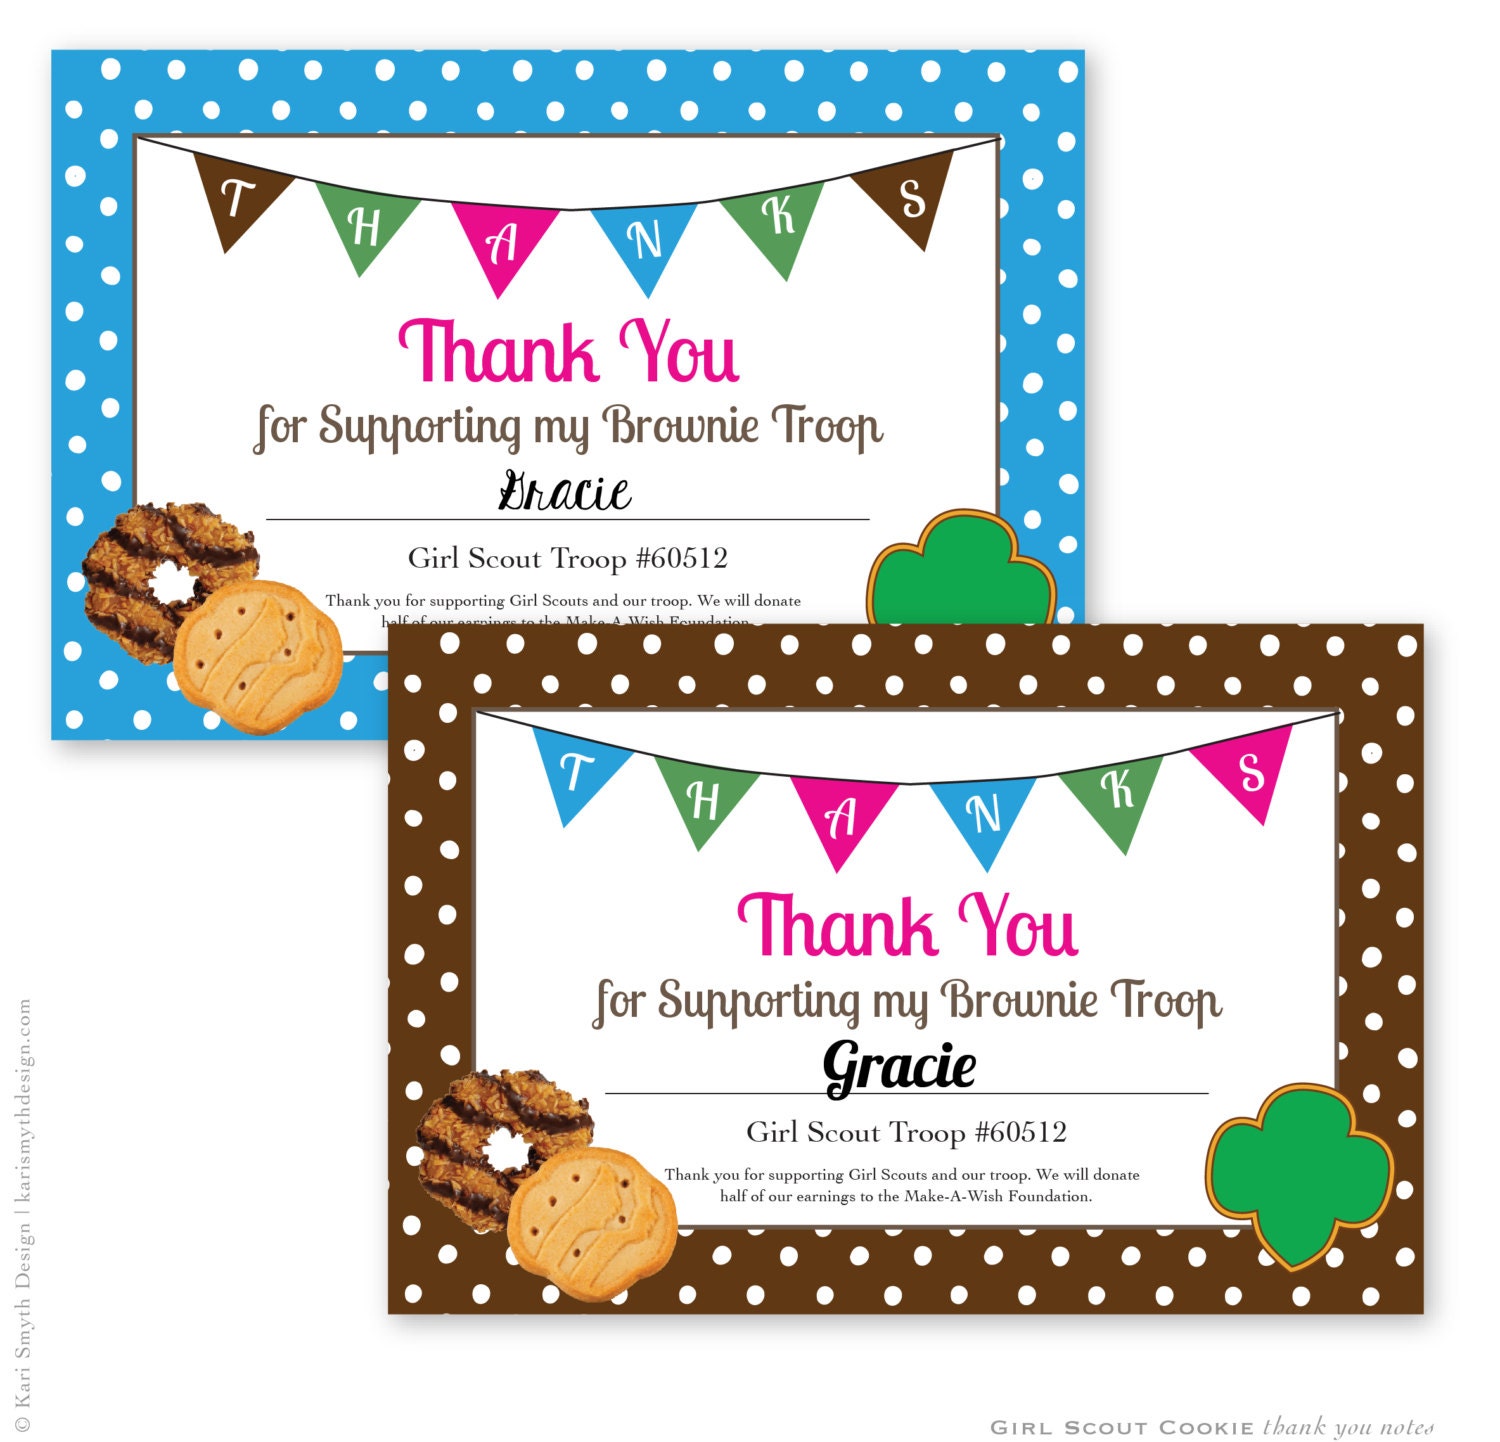 Free Printable Thank You Notes For Girl Scout Cookies